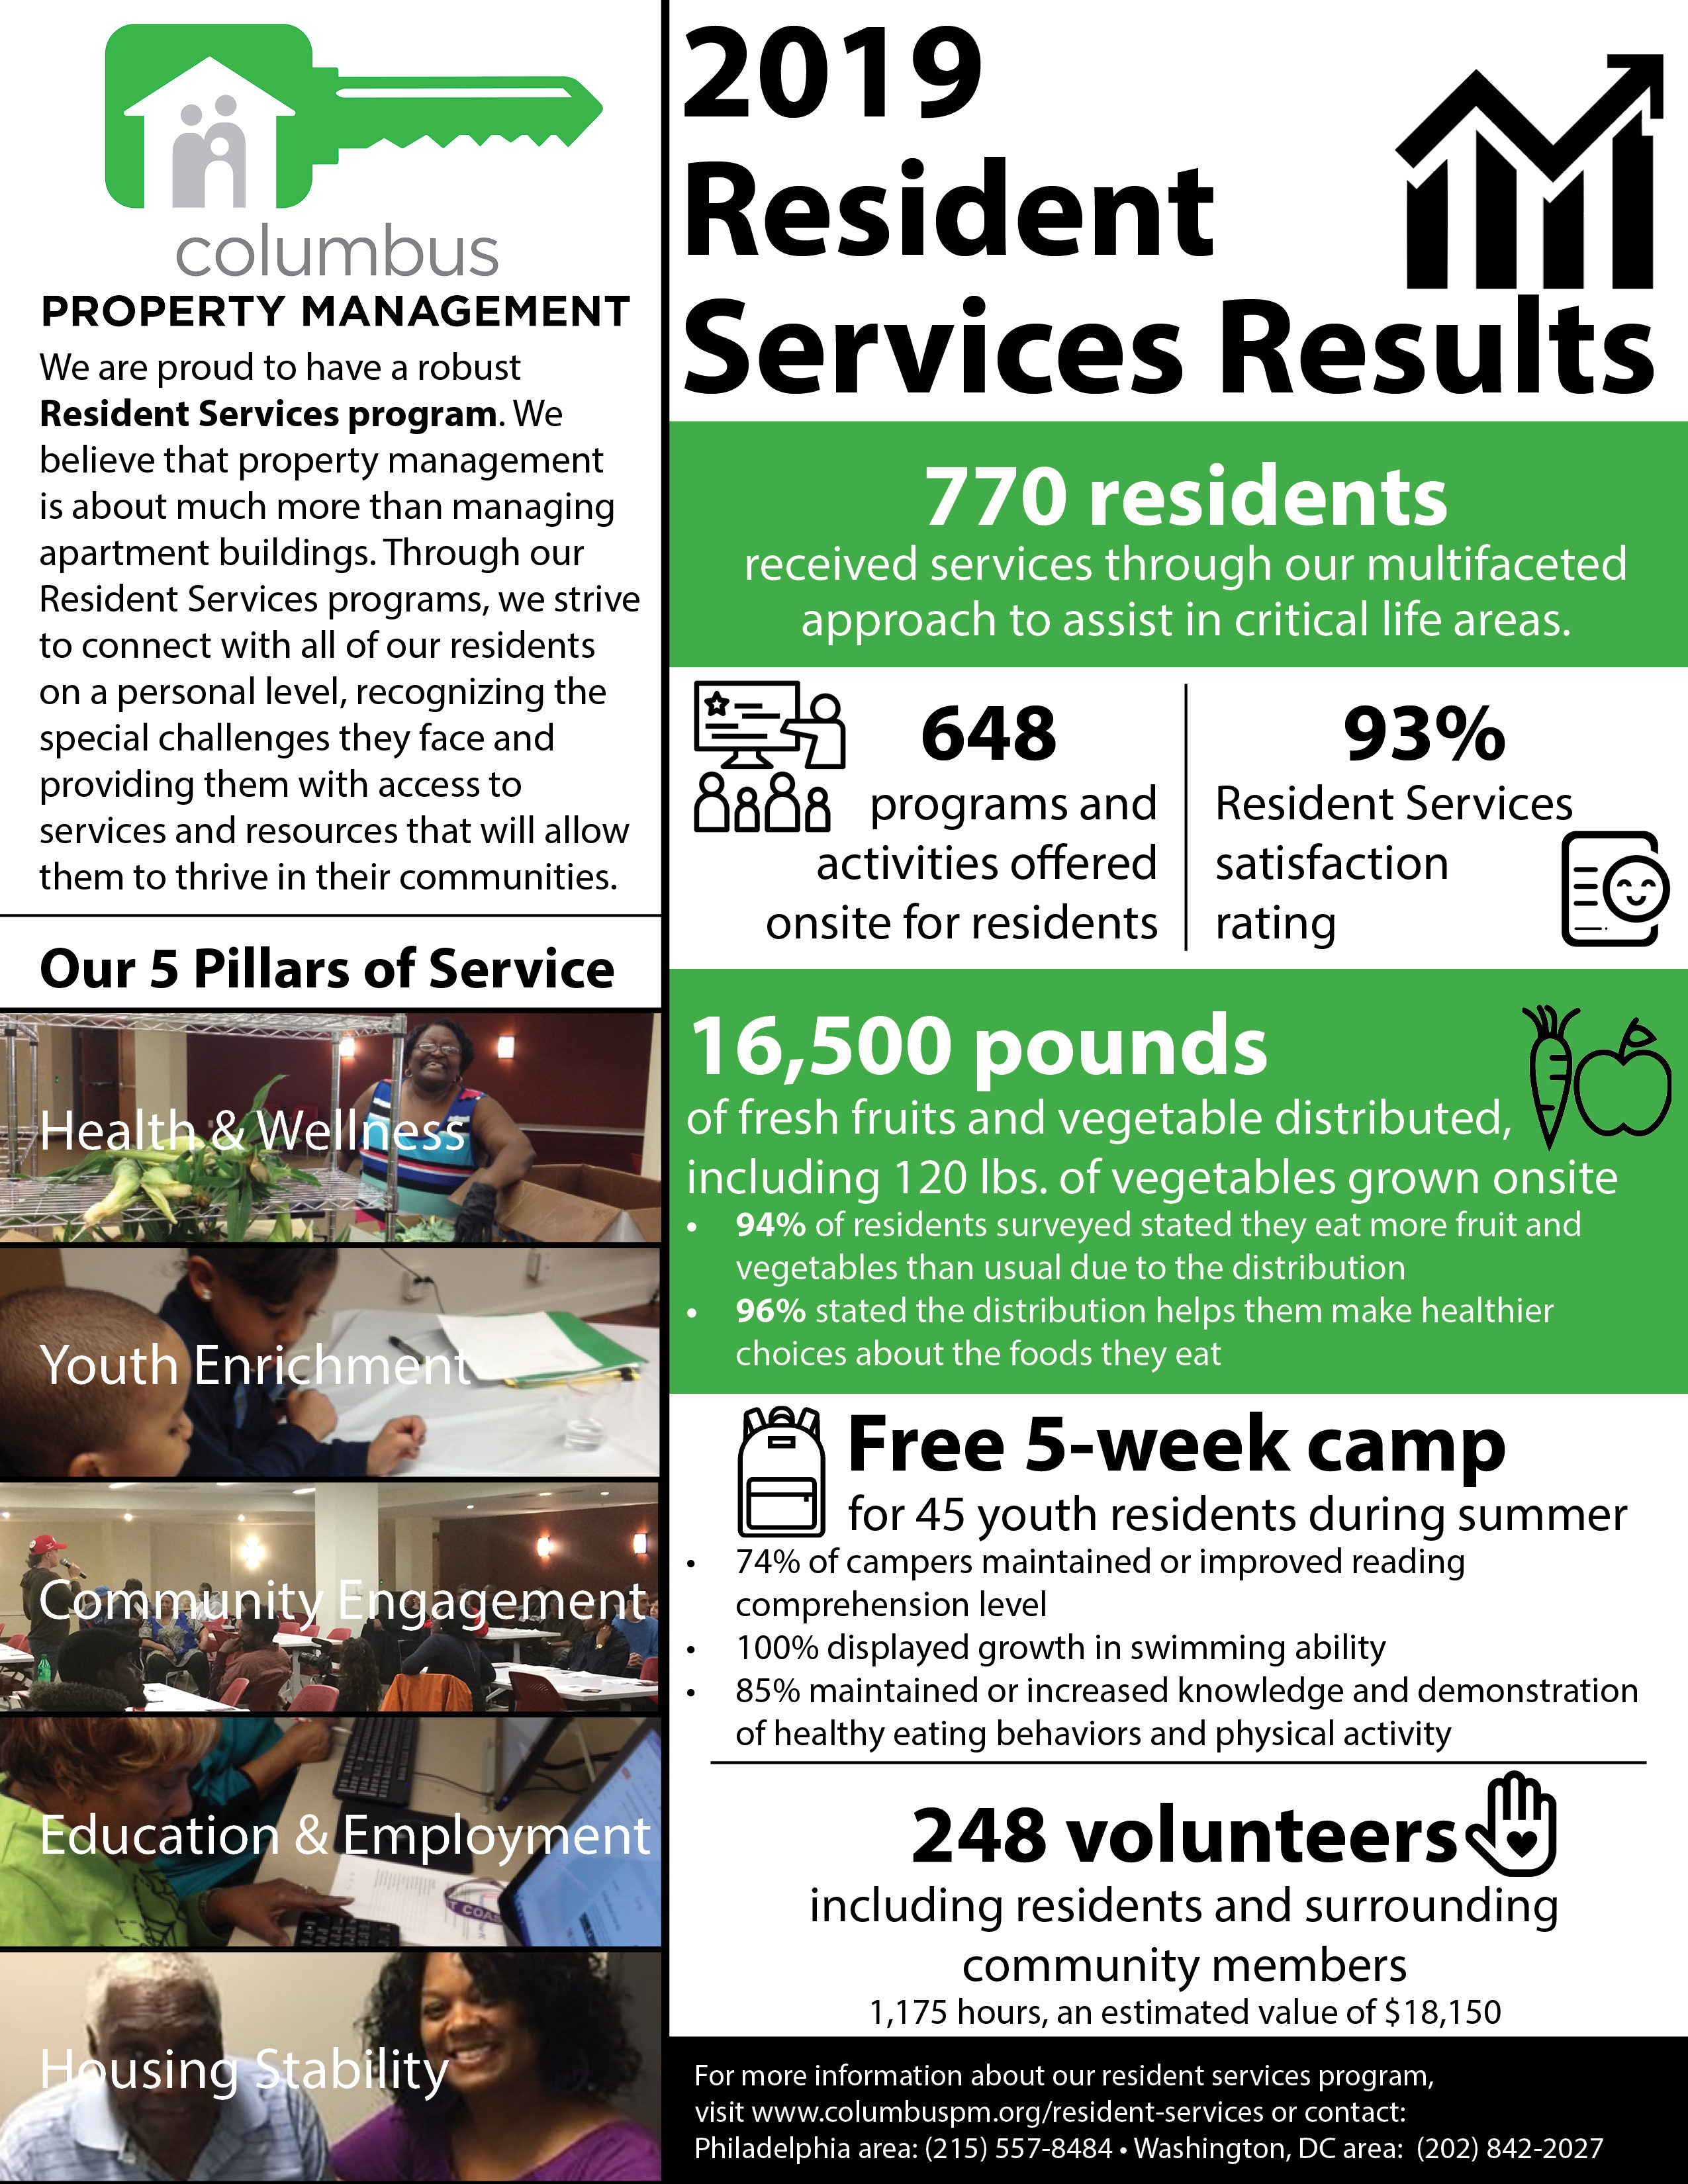 2019 Resident Services Results Columbus Property Management